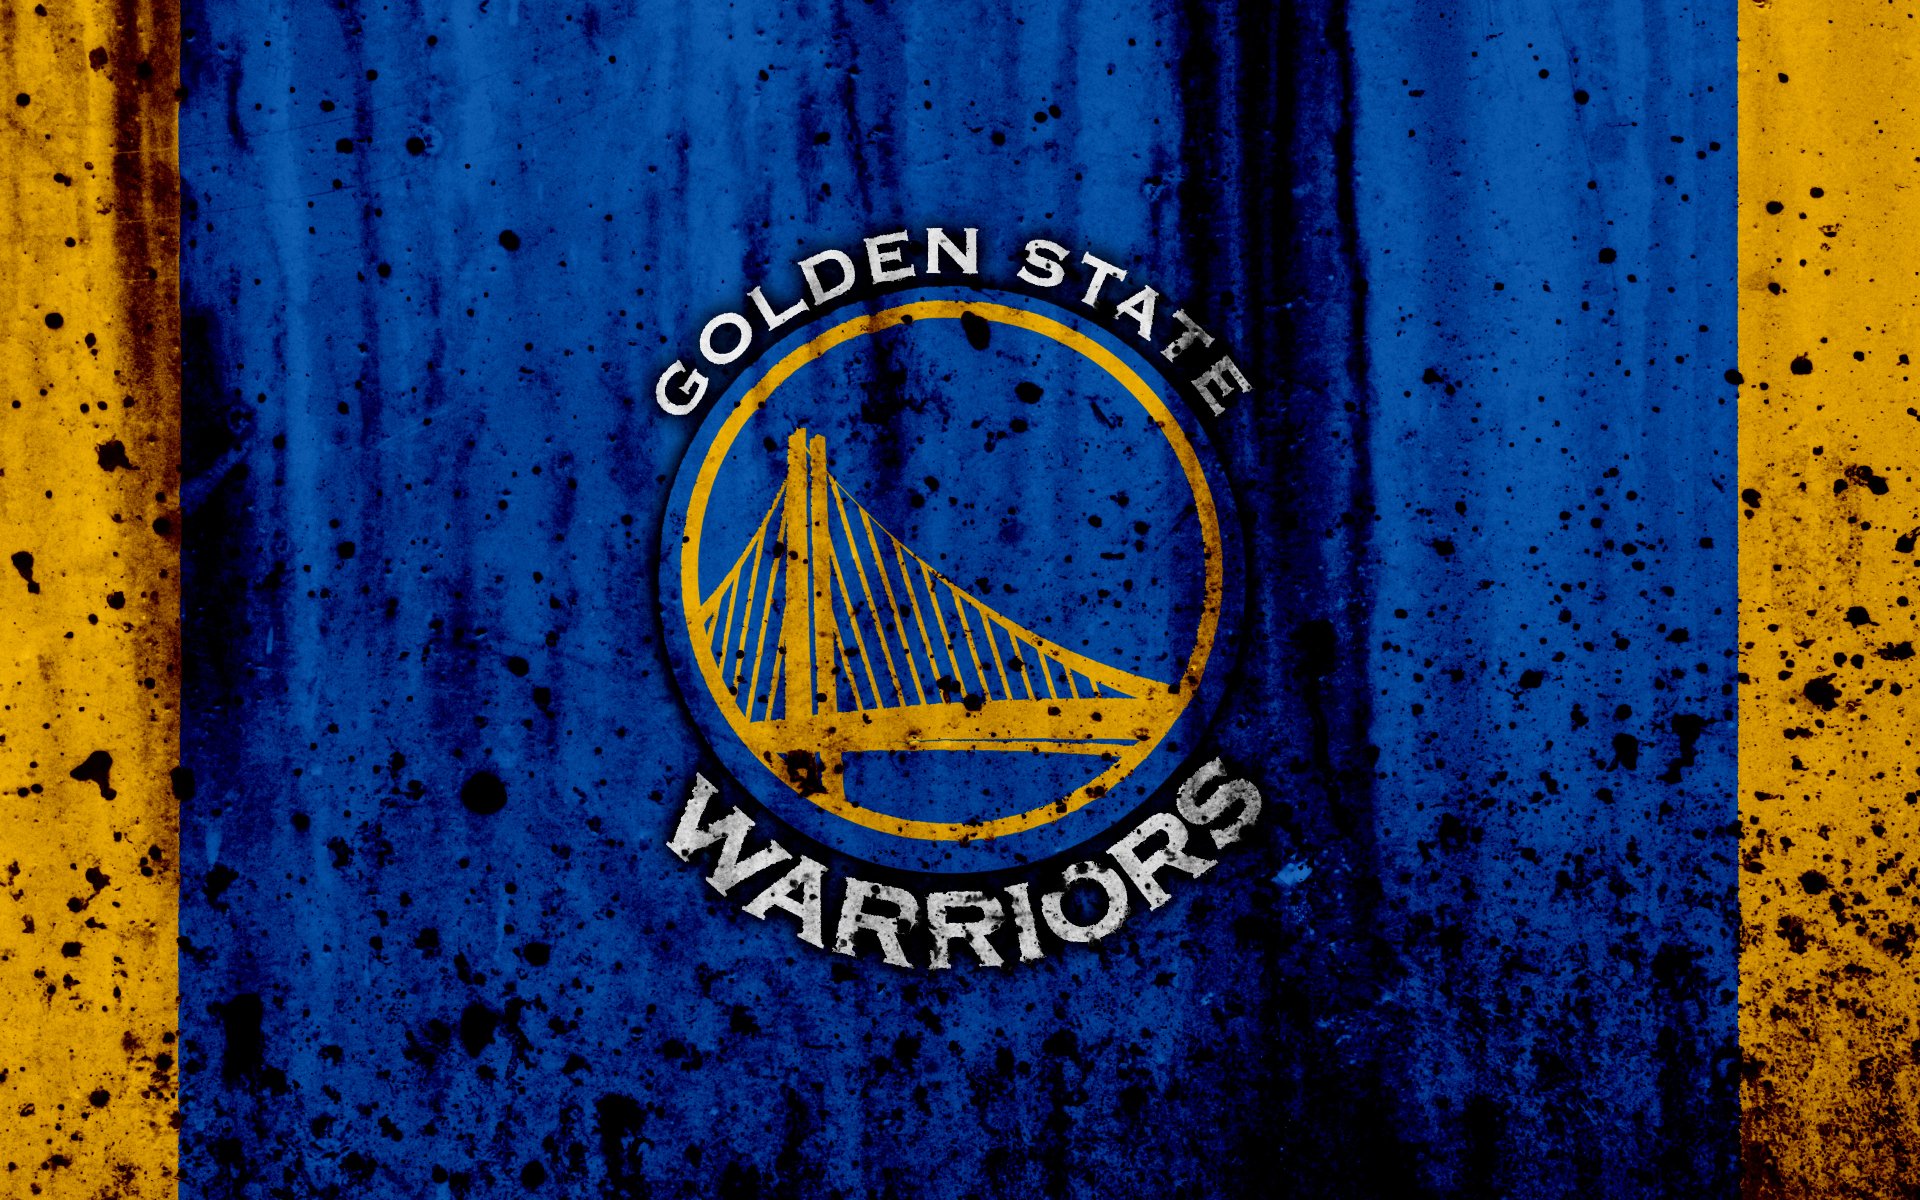 Golden state warriors logo hi-res stock photography and images - Alamy